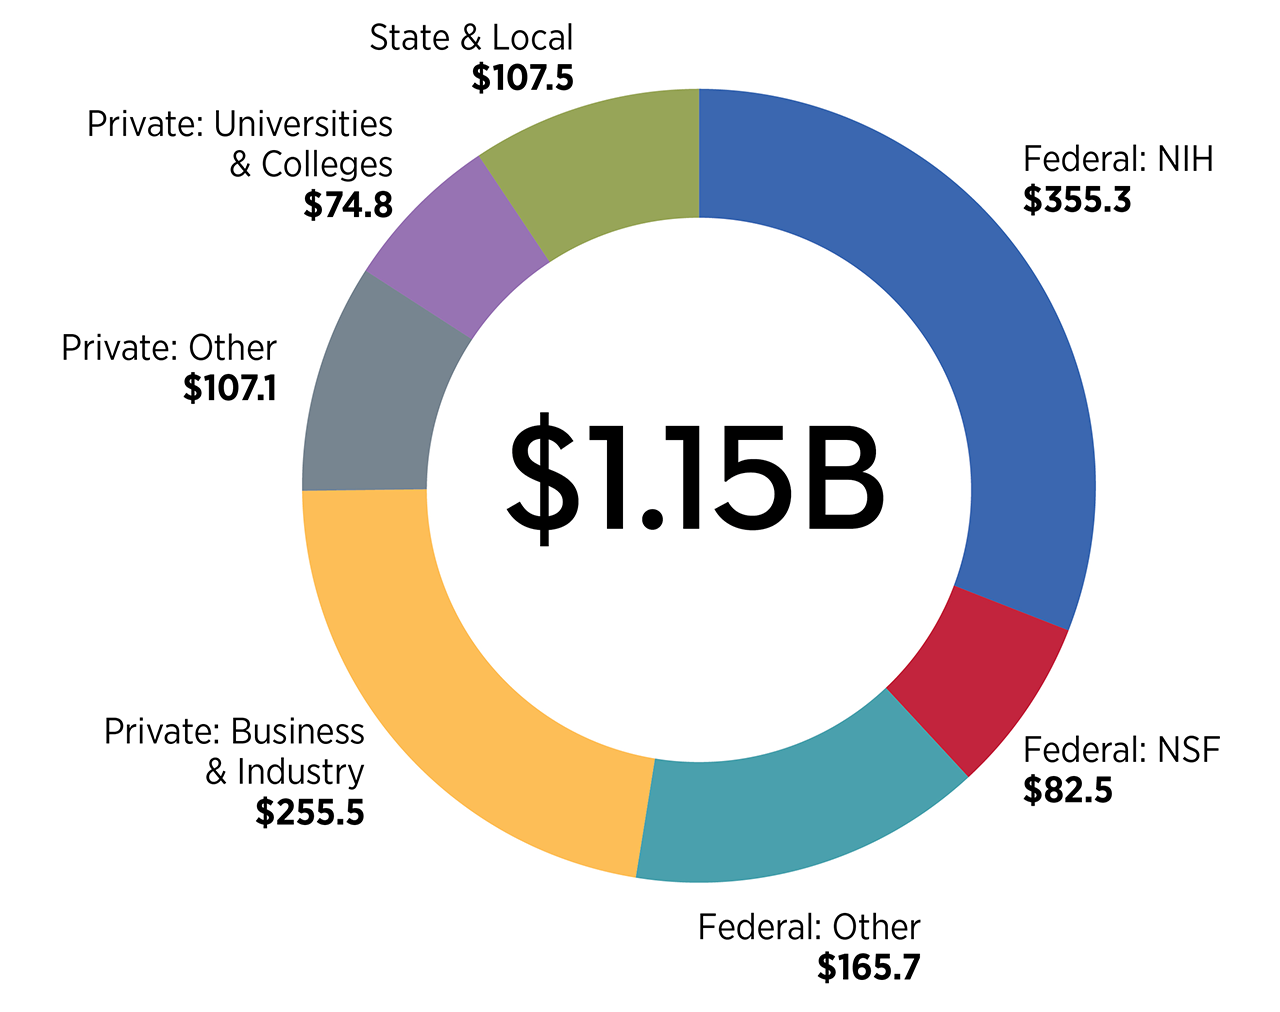 Alt Text: Funding sources: $355M Federal NIH; $83M Federal-NSF; $166M Federal-Other; $256M Private-Business/Industry; $107M Private-Other; $75M Private-Universities & Colleges; $108M State & Local. $1.15B Total.